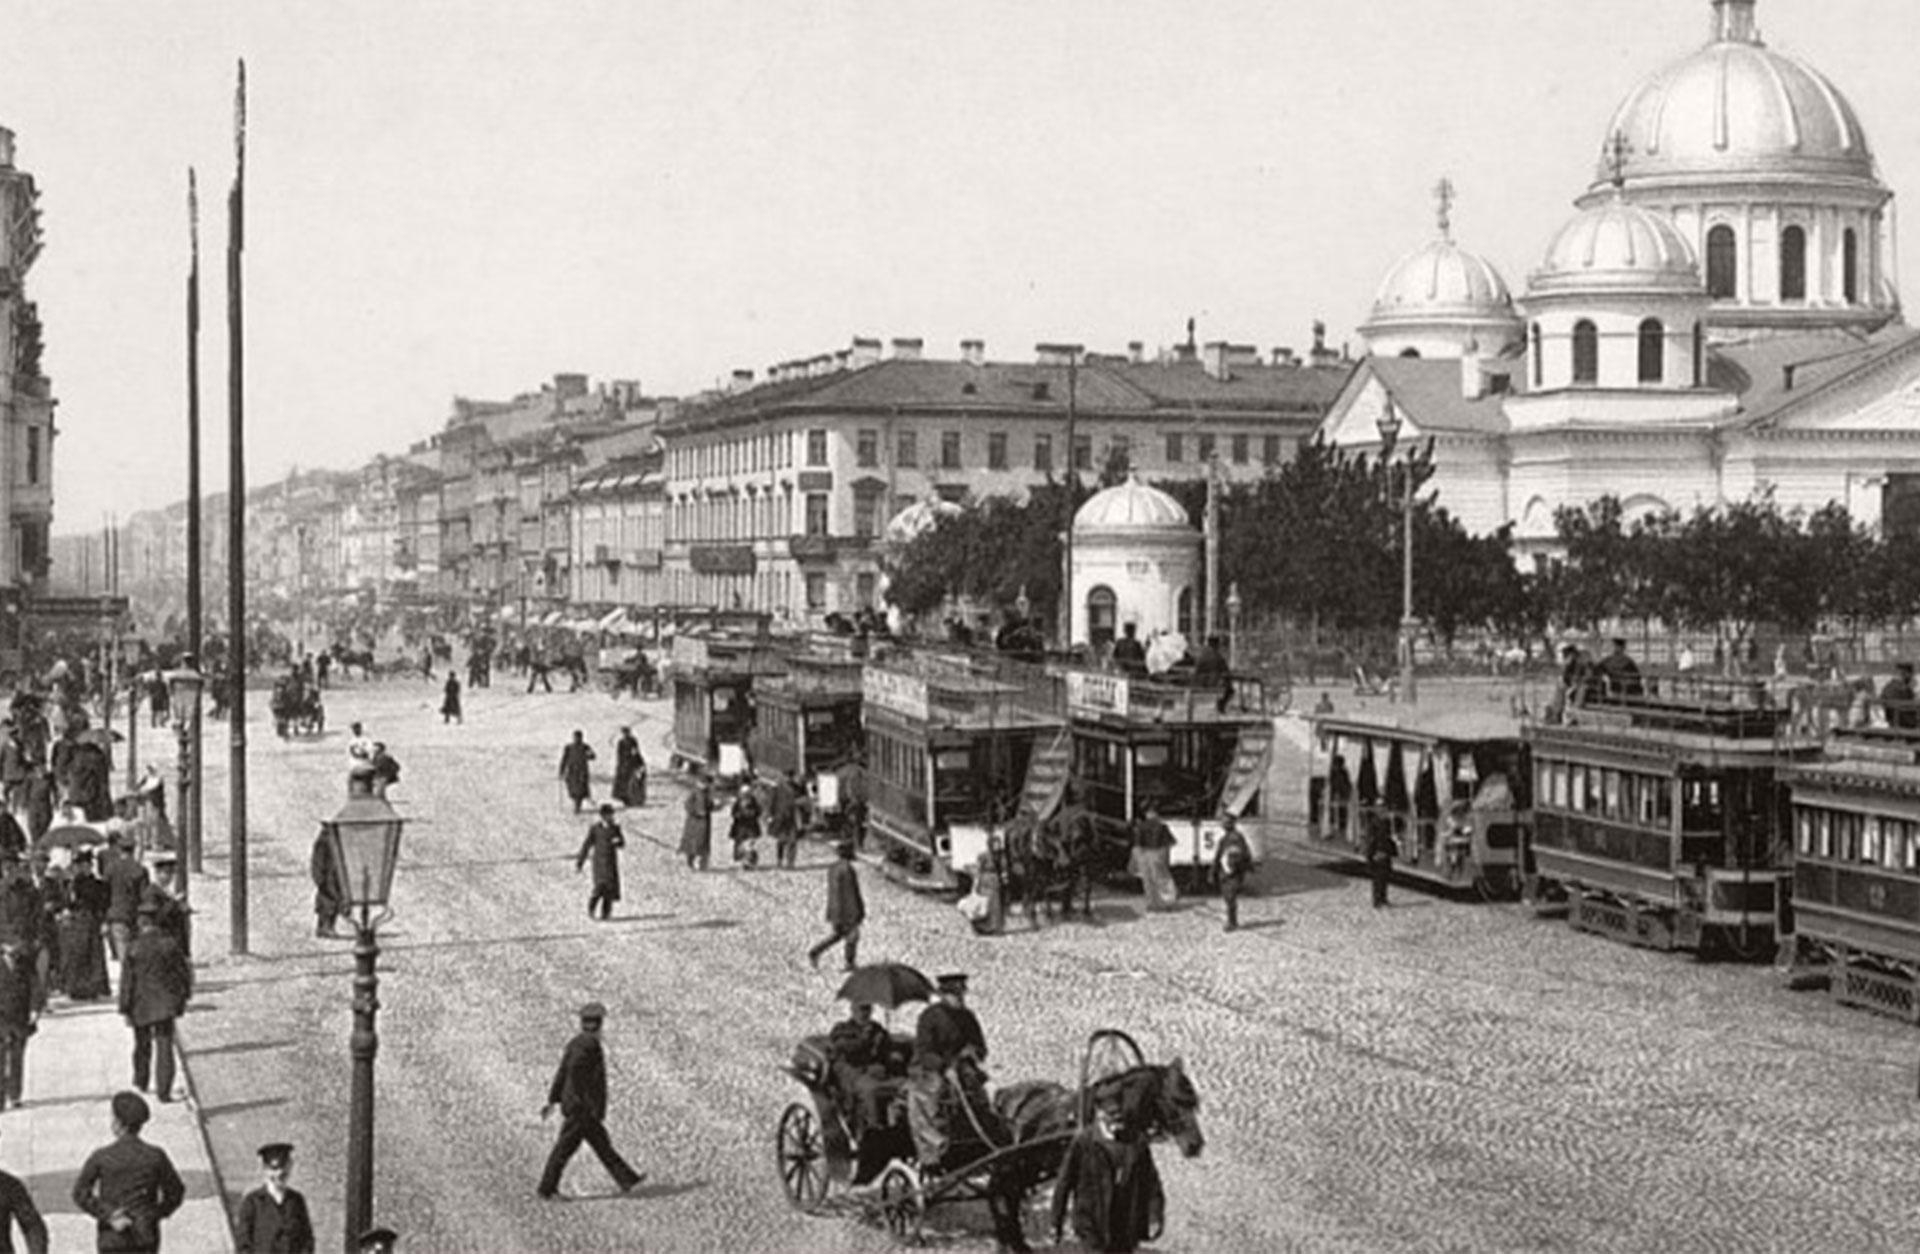 historic-bw-photos-of-st-petersburg-russia-in-the-19th-century-07-1040x440